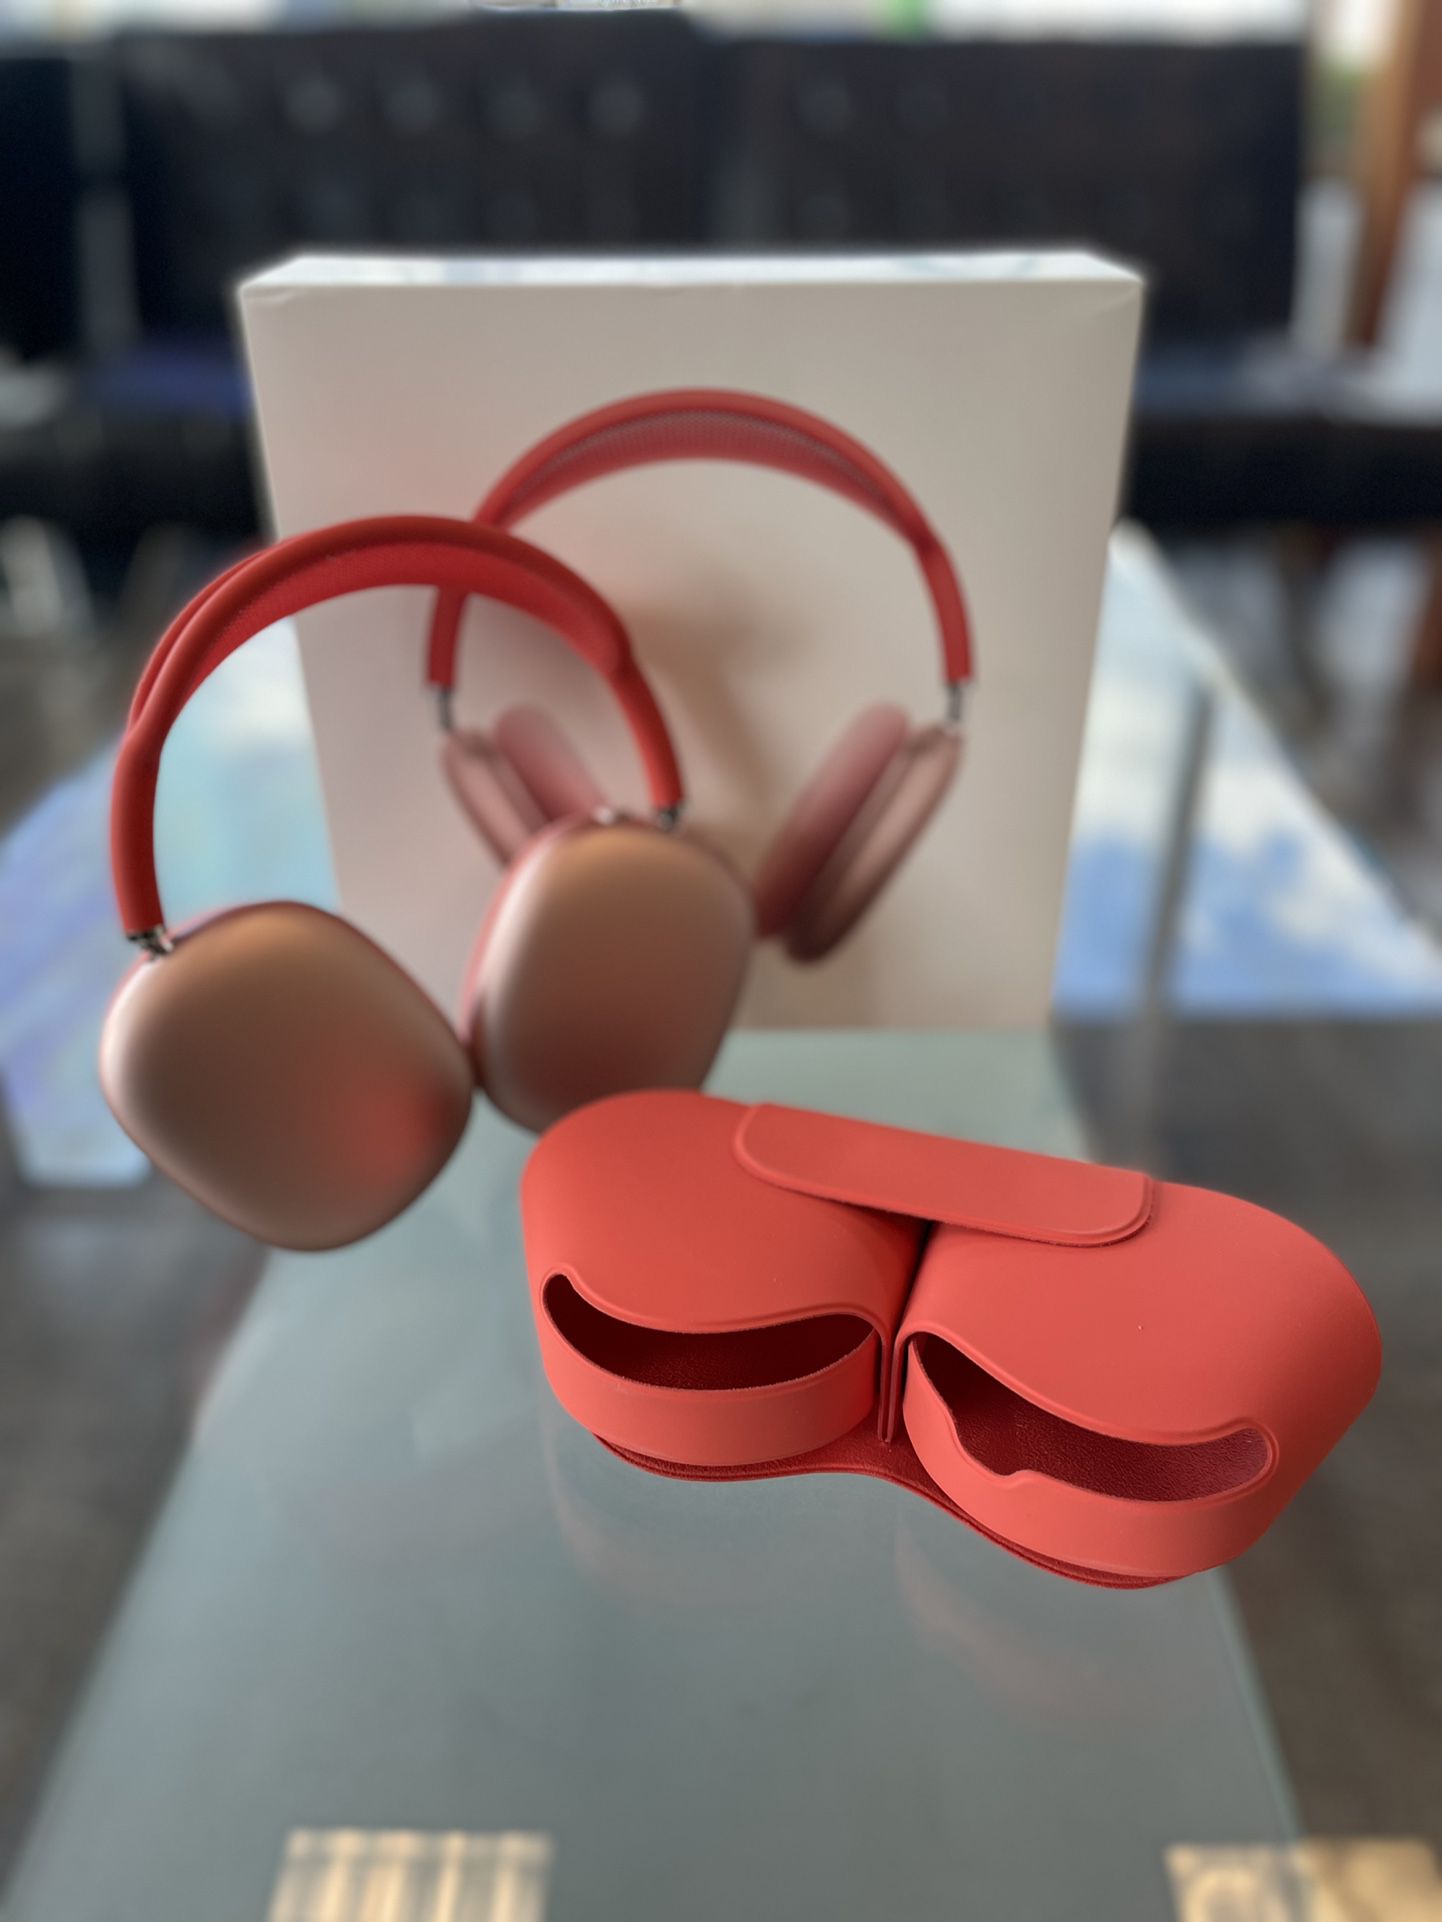 Apple AirPods Max (will take payments ->)